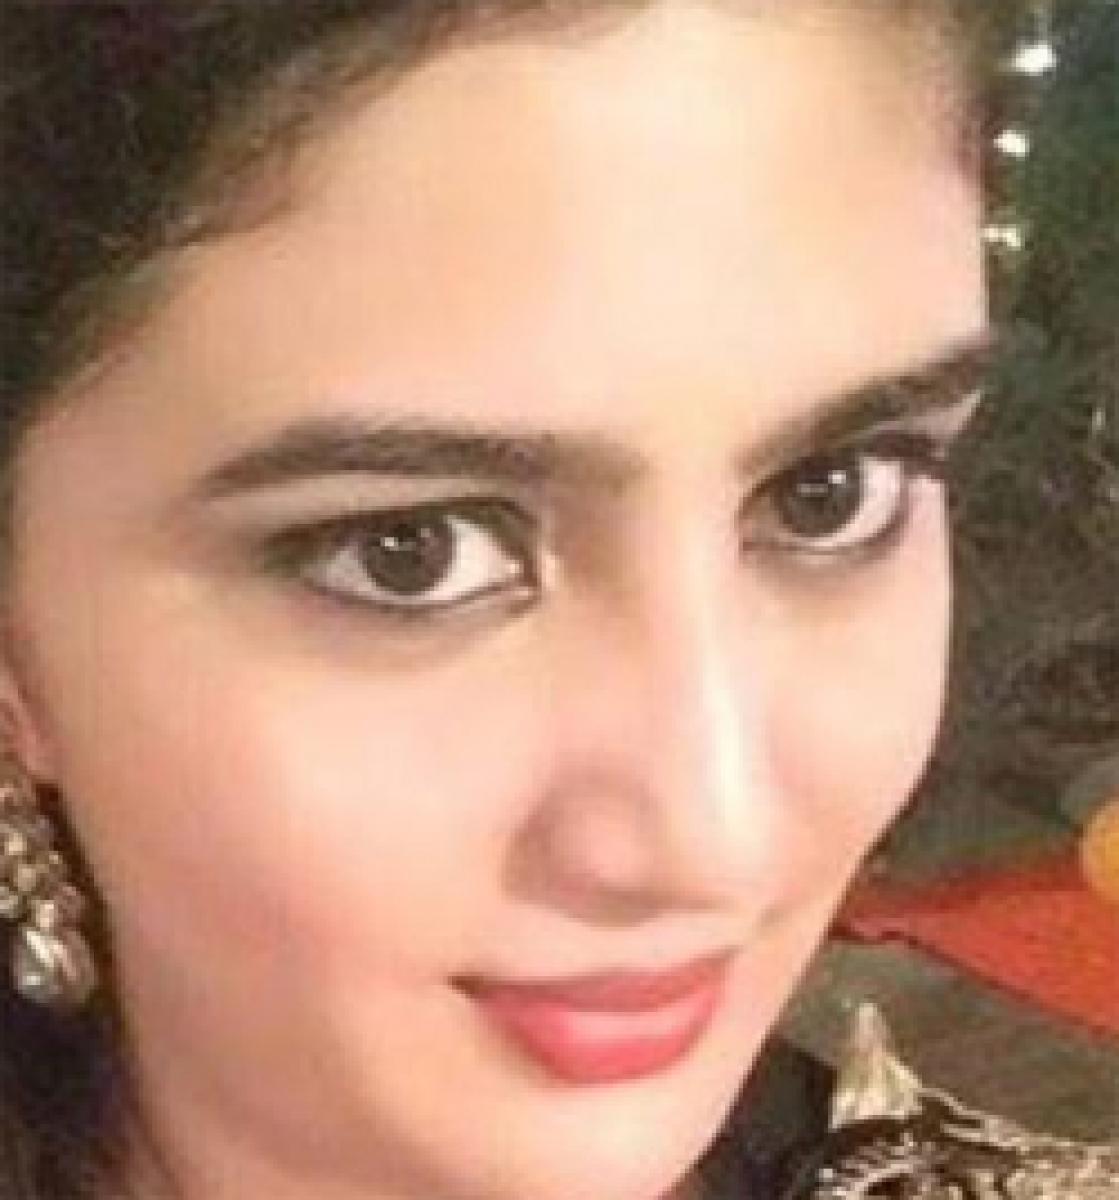 Missing Noida fashion designer planned her own kidnapping, say cops